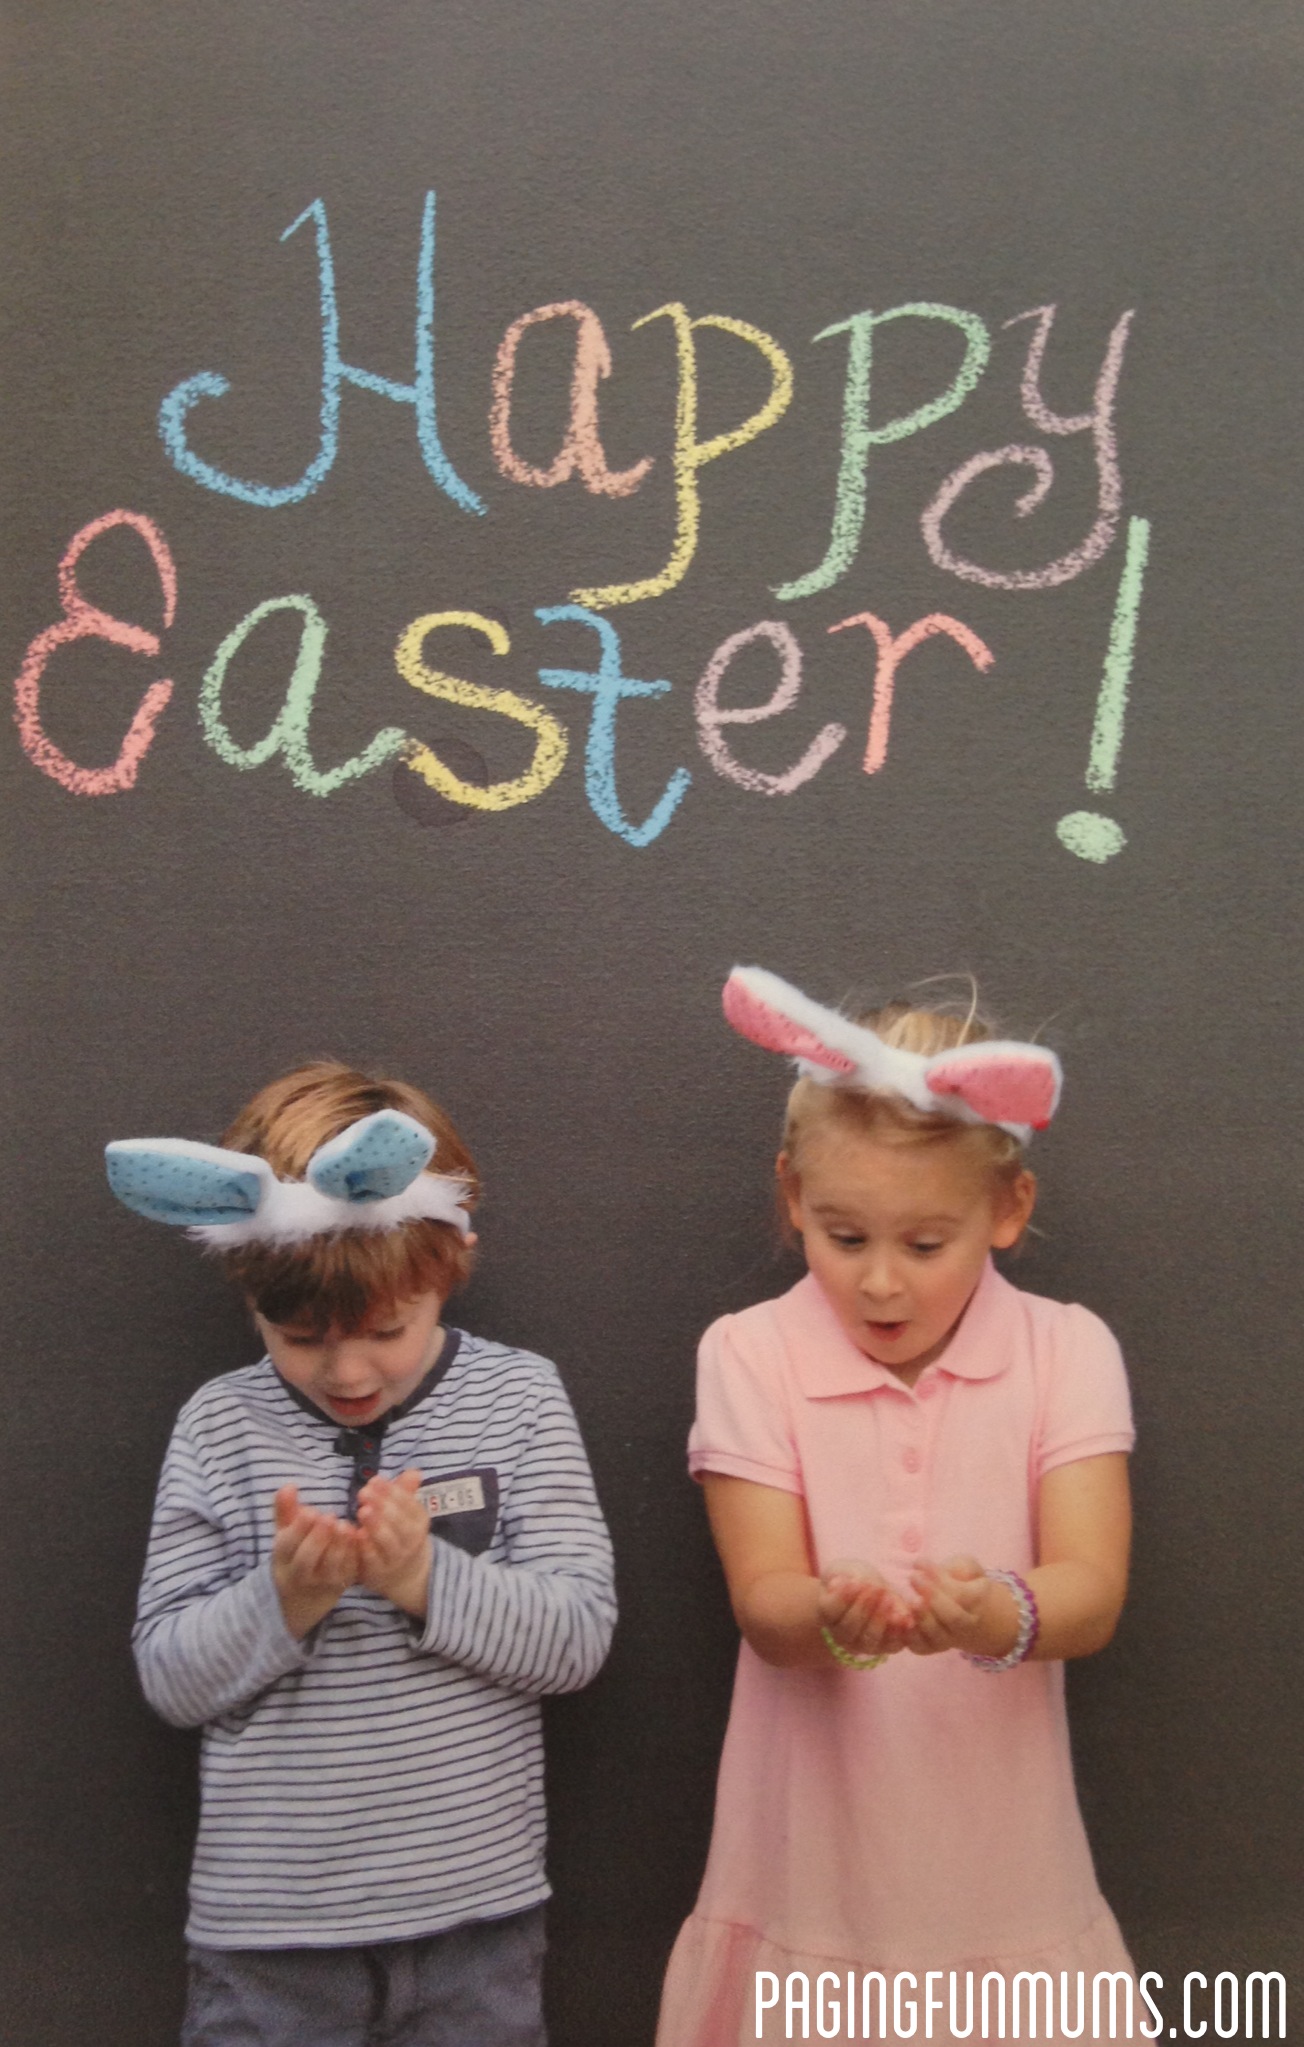 Adorable Easter Card with a twist!